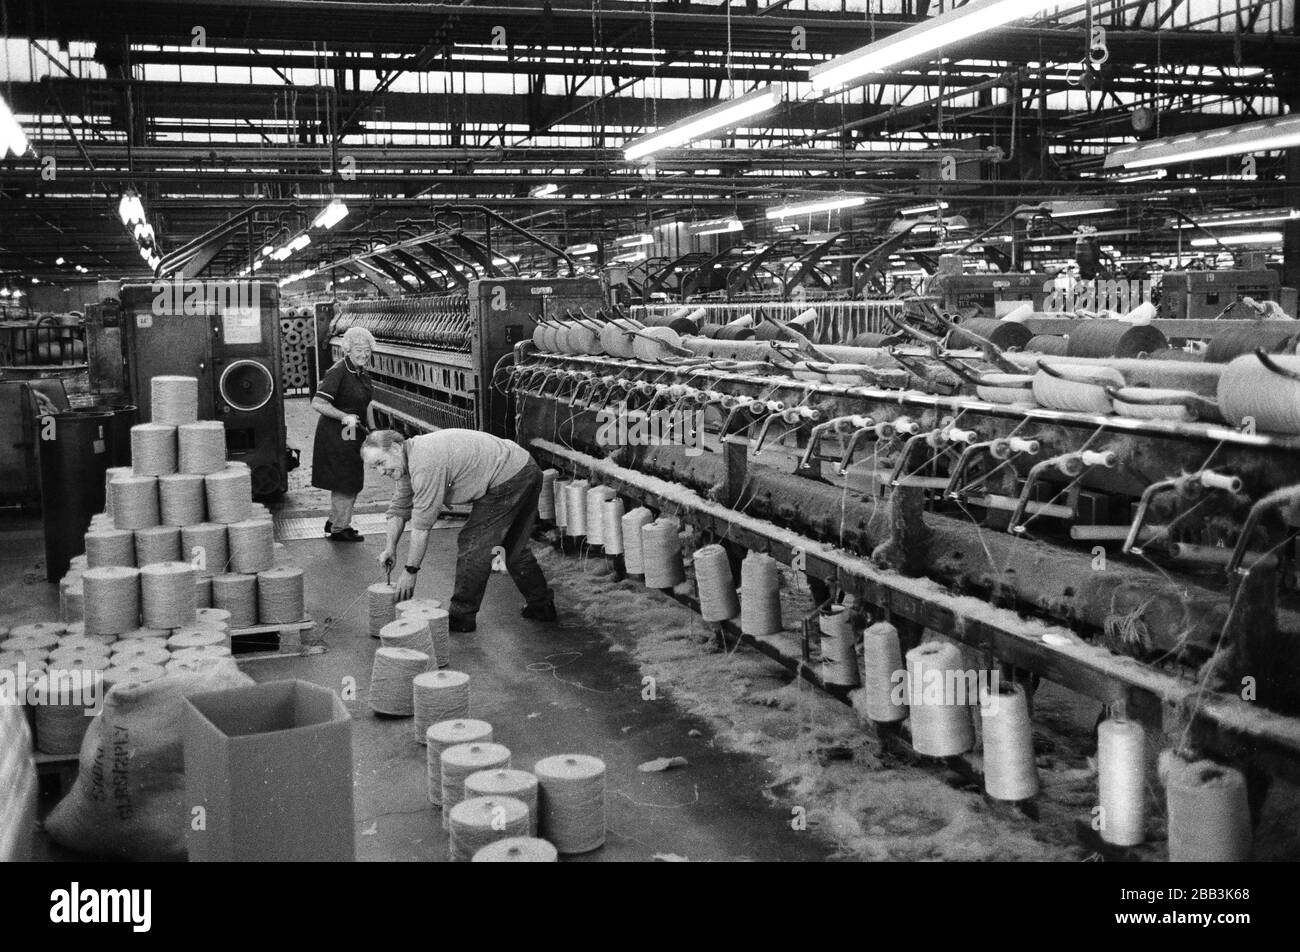 Two workers supervising a machine at Tay Spinners mill in Dundee, Scotland. This factory was the last jute spinning mill in Europe when it closed for the final time in 1998. The city of Dundee had been famous throughout history for the three 'Js' - jute, jam and journalism. Stock Photo